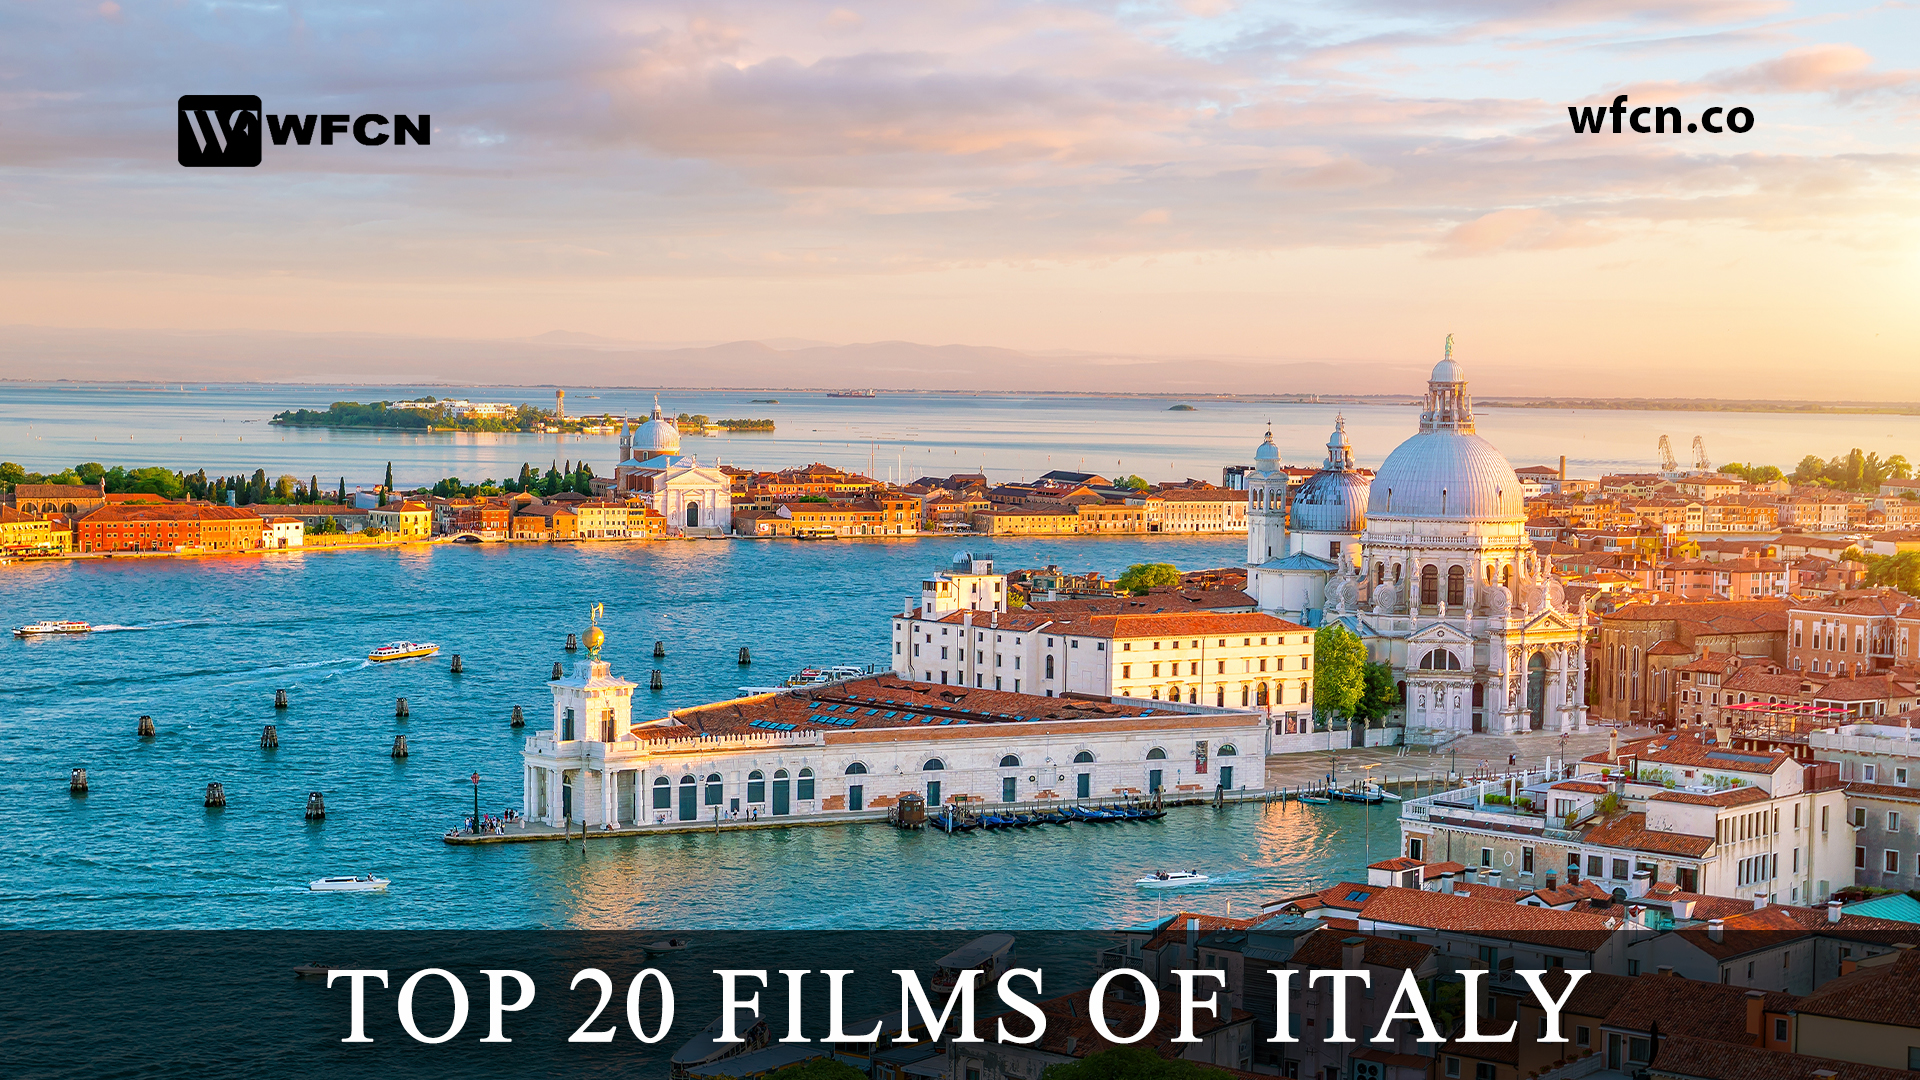 Most Popular Films of Italy